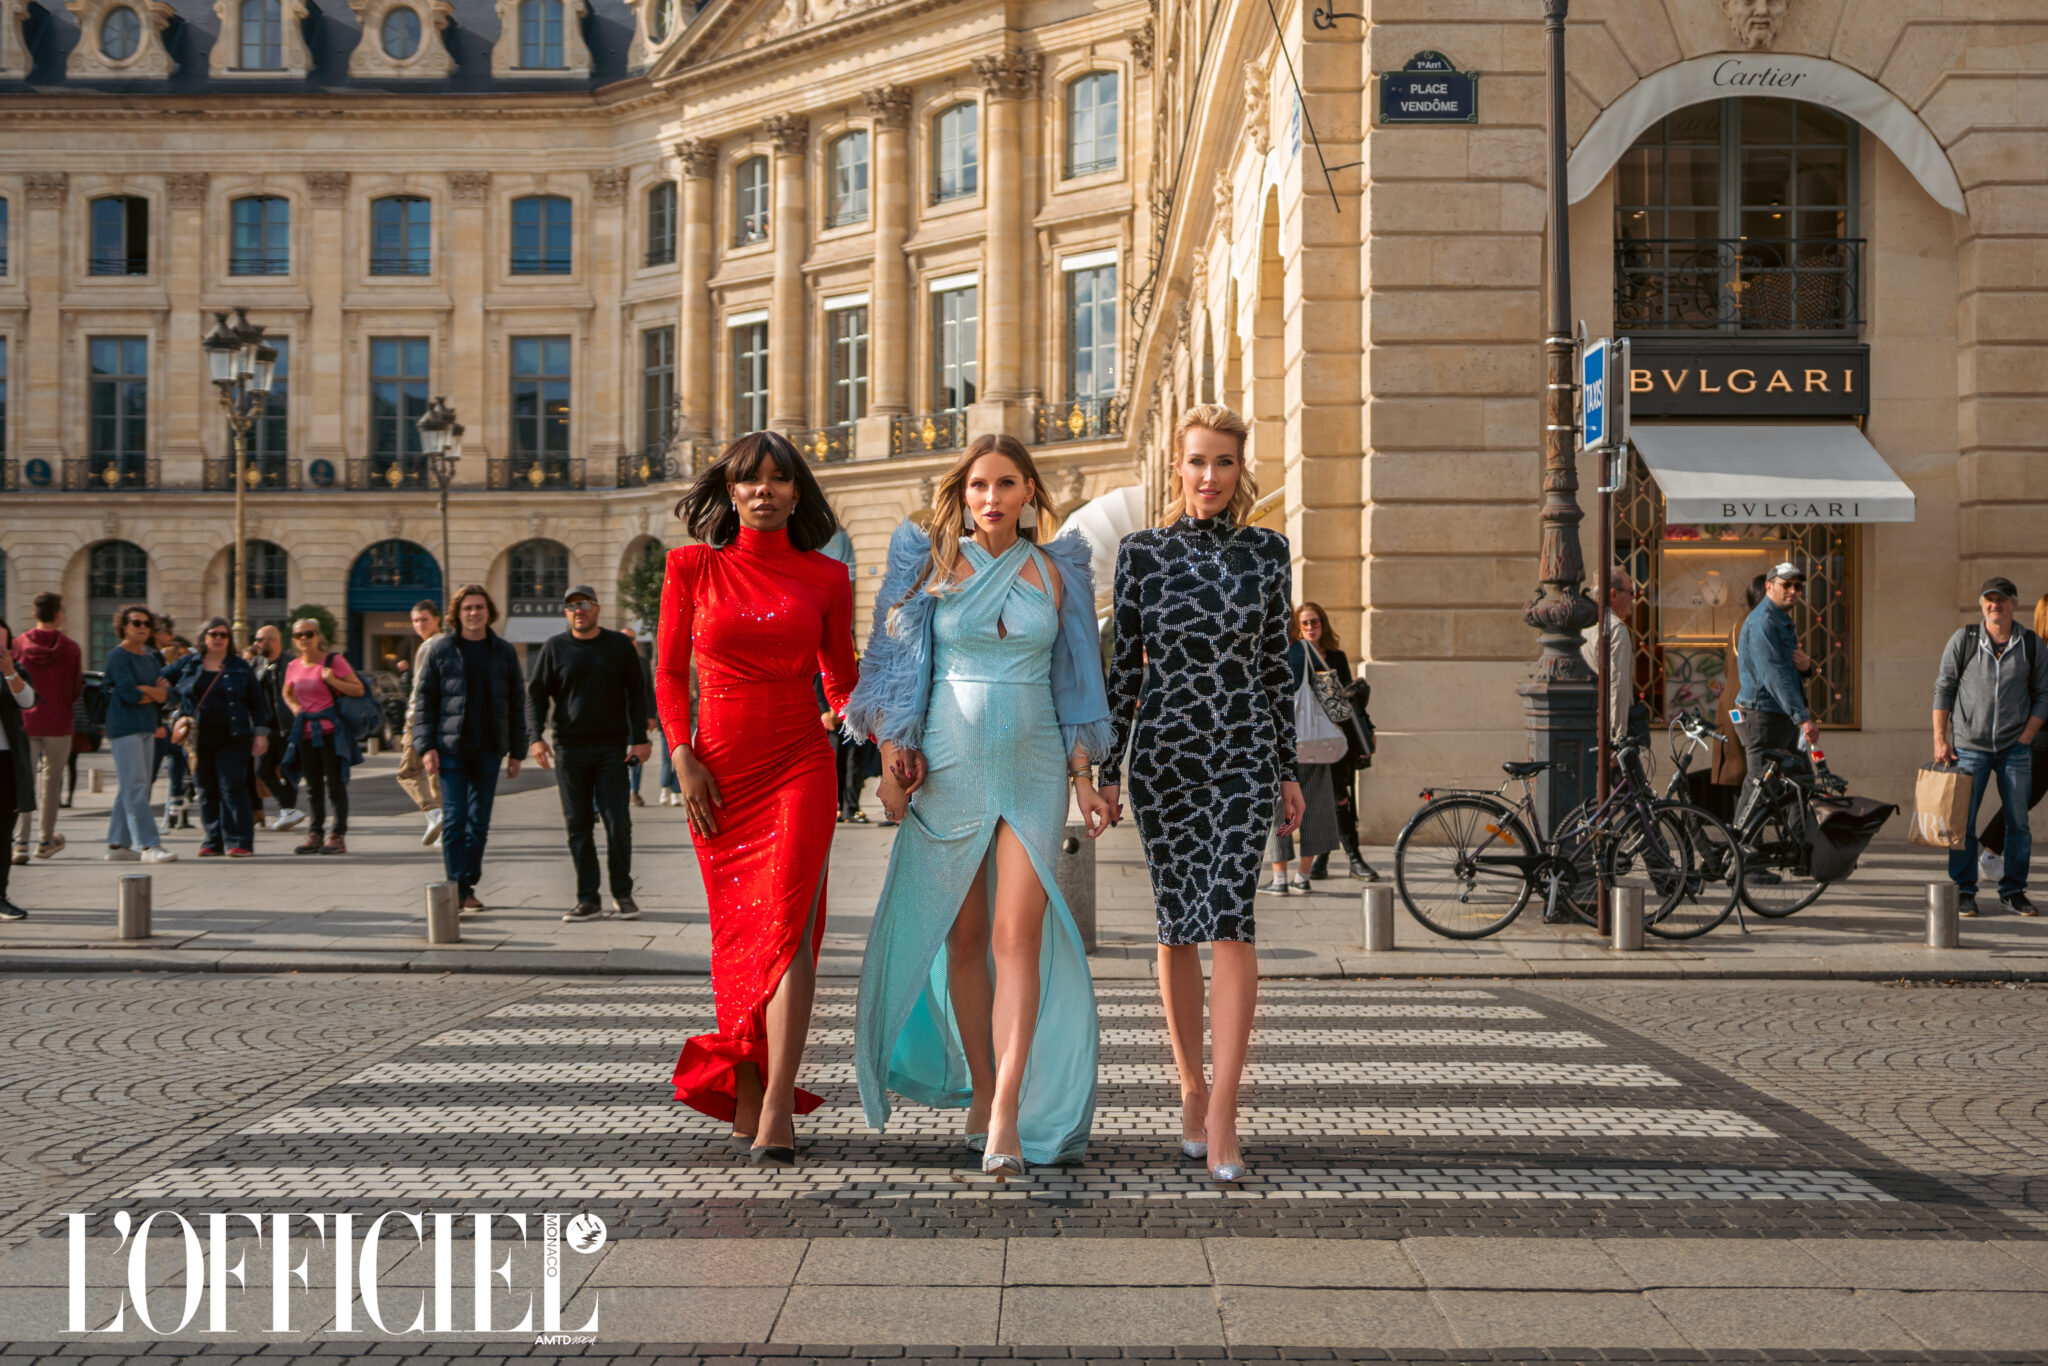 Feature at L'Officiel Monaco during Paris Fashion Week SS 23. Visual Fashion Story from the magical Paris. Featuring: Nicolas Besson, Gemy Maalouf, Charriol, Sol Angelann and more. 4